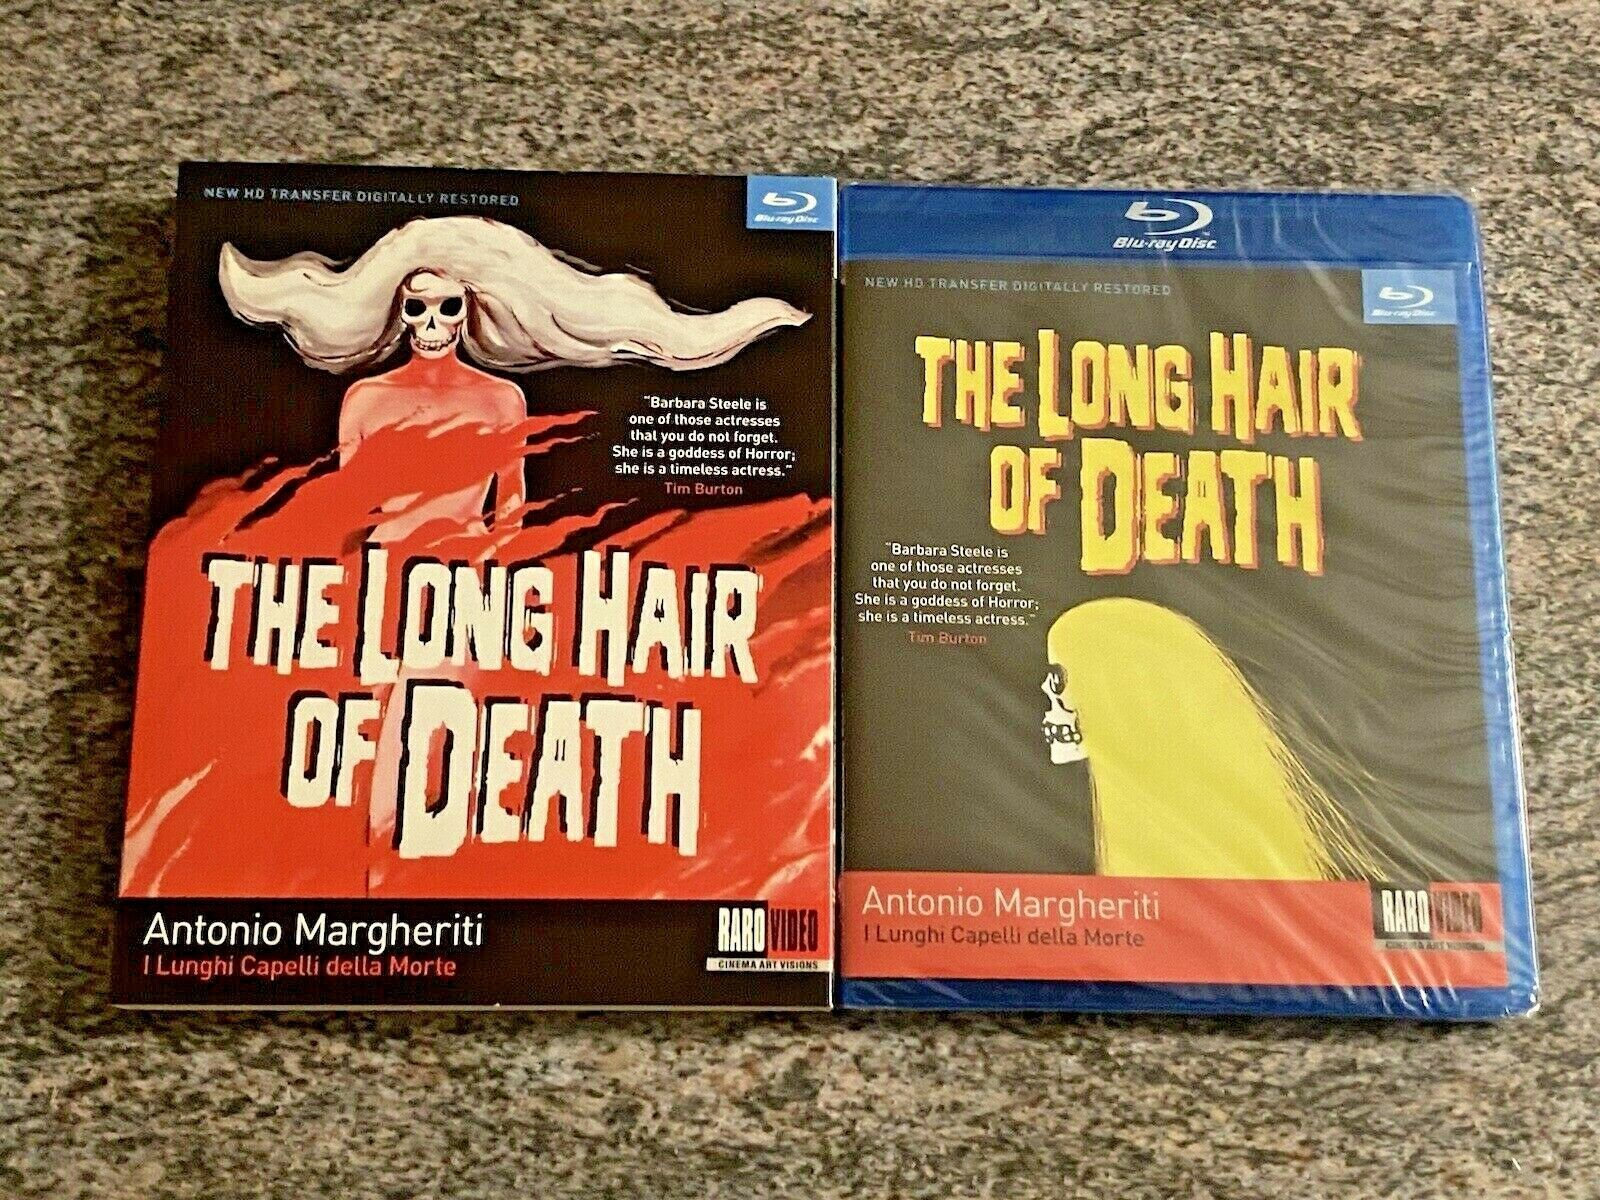 Long Hair of Death (Blu-ray) - wide 5